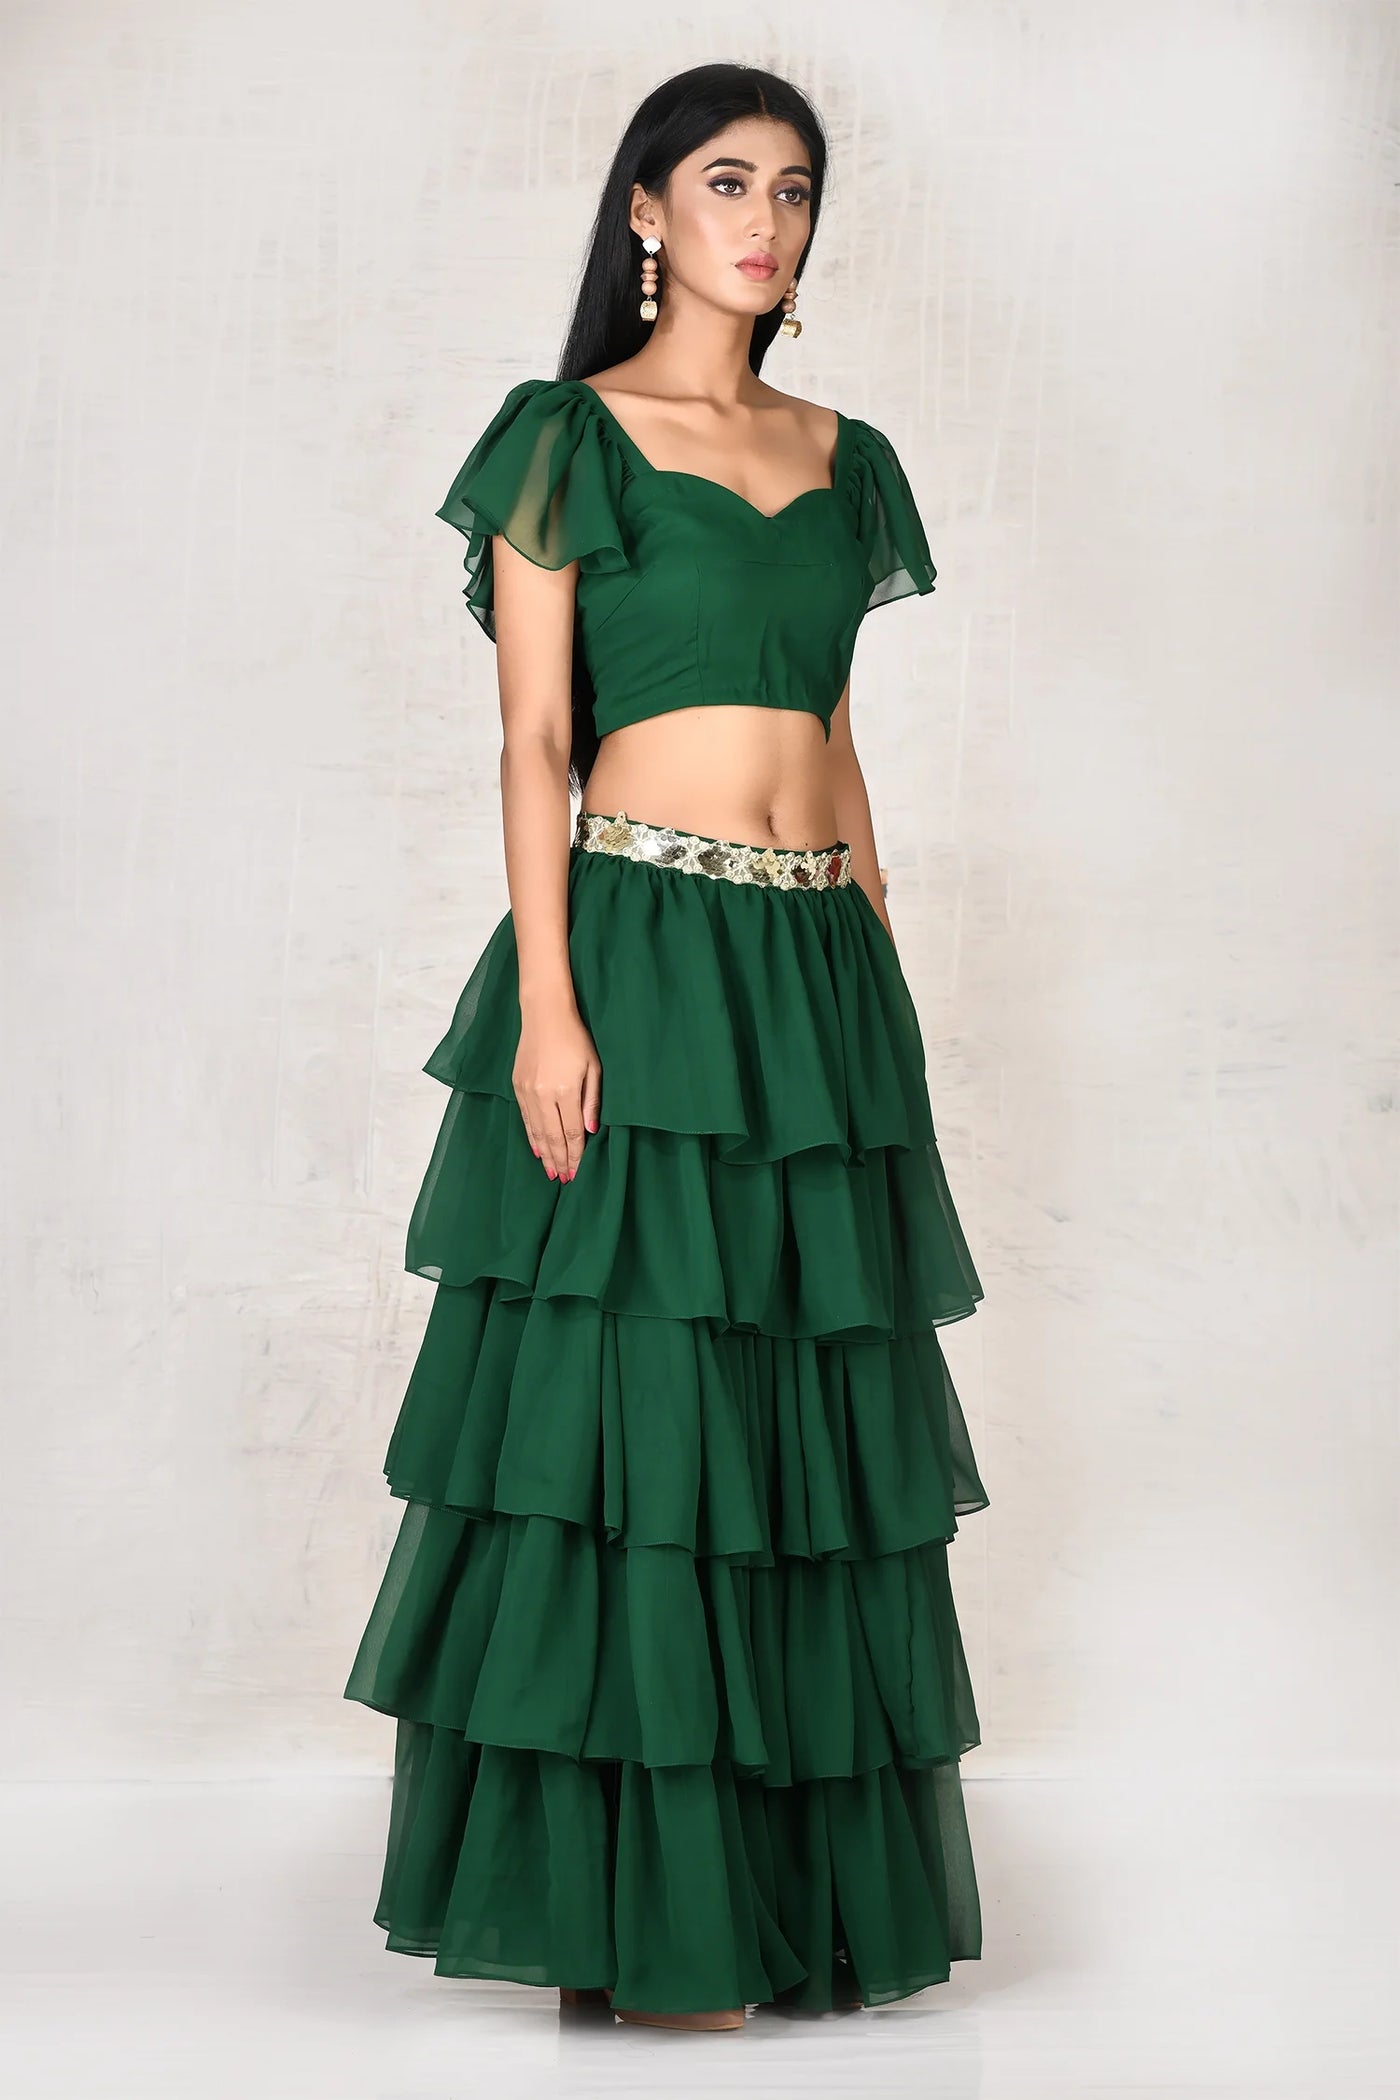 Emerald Green Outfits For The Cocktail That Are Absolute Stunners! | Indian  outfits lehenga, Indian bridal outfits, Indian bridal dress